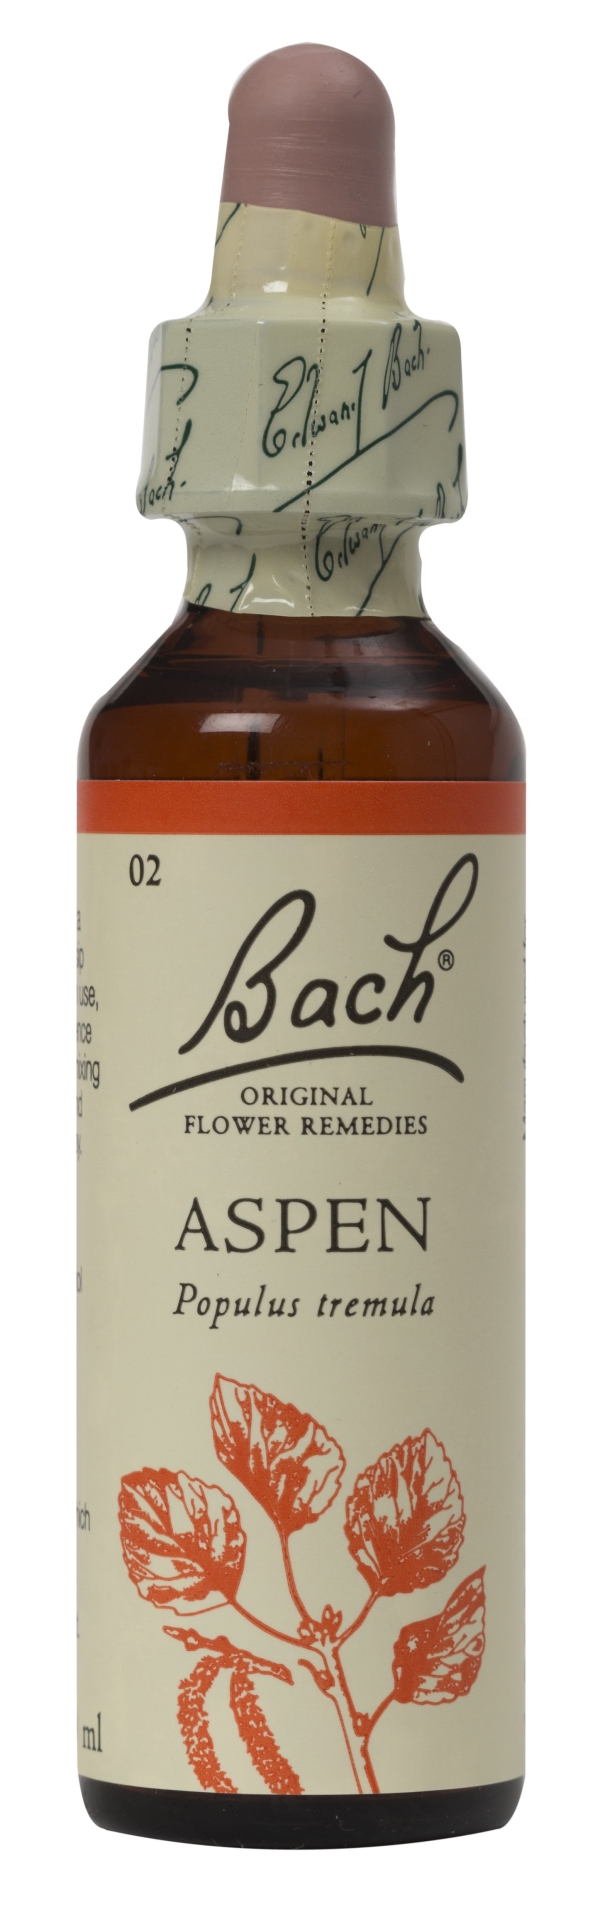 Nelson Bach Flower Remedies: Bach Aspen Flower Remedy (20ml) available online here